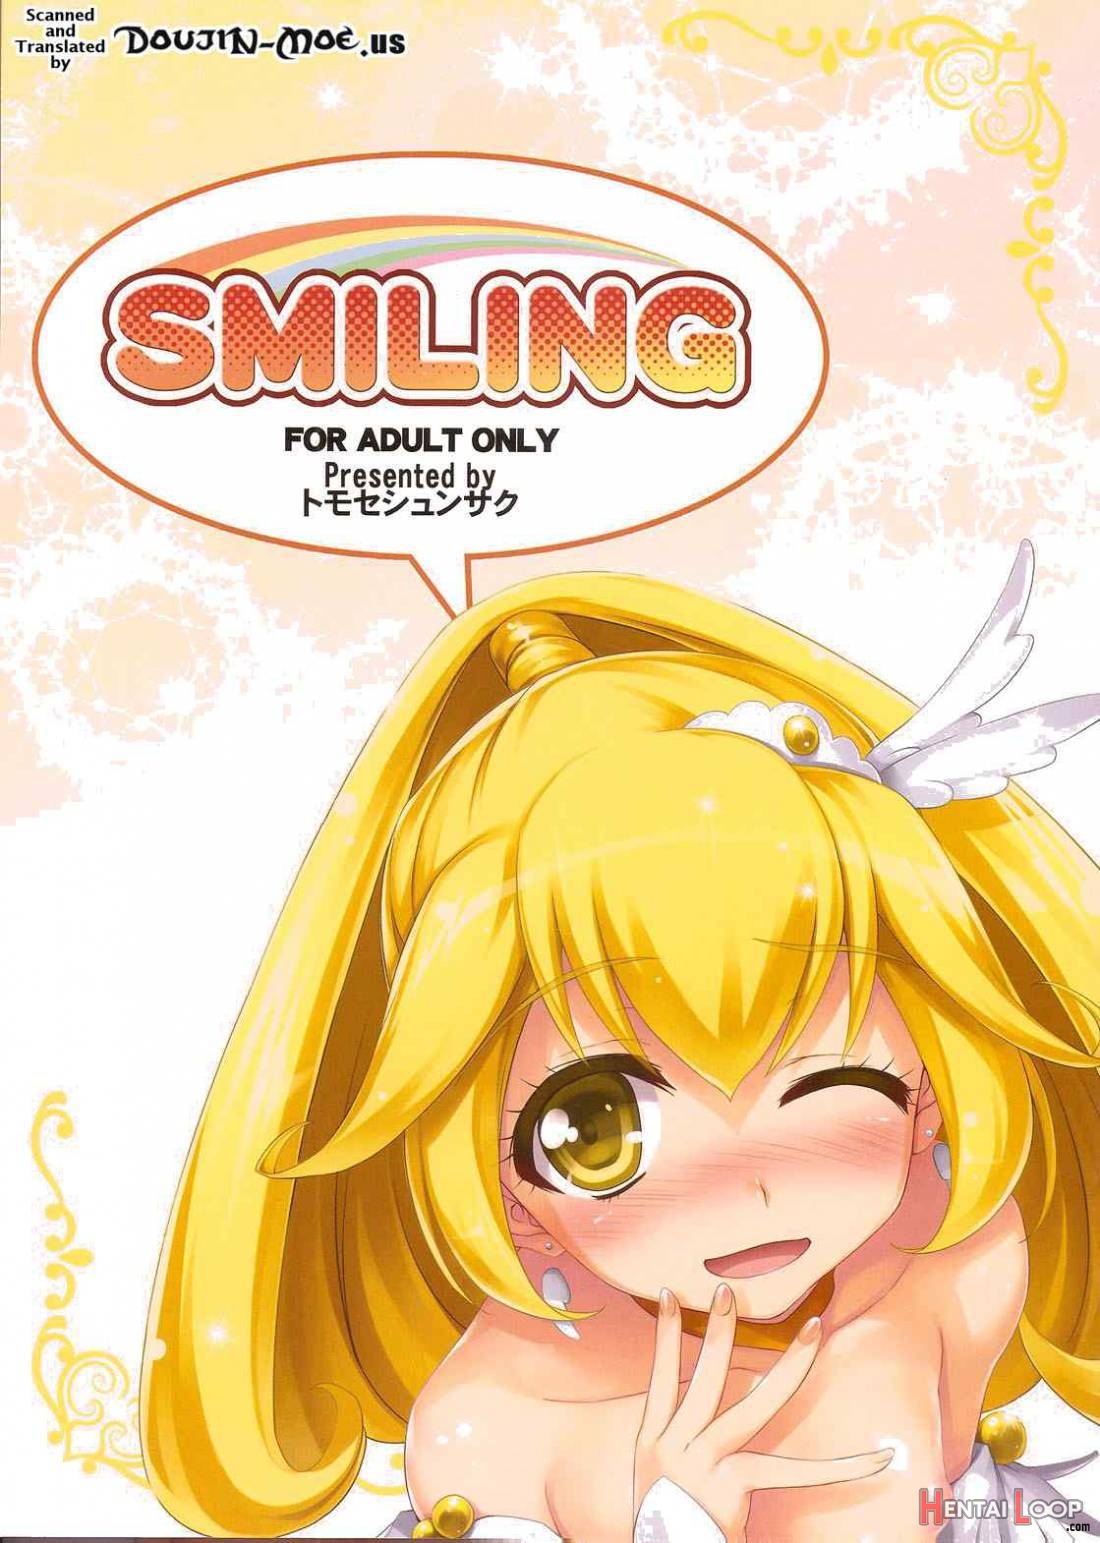 SMILING page 2